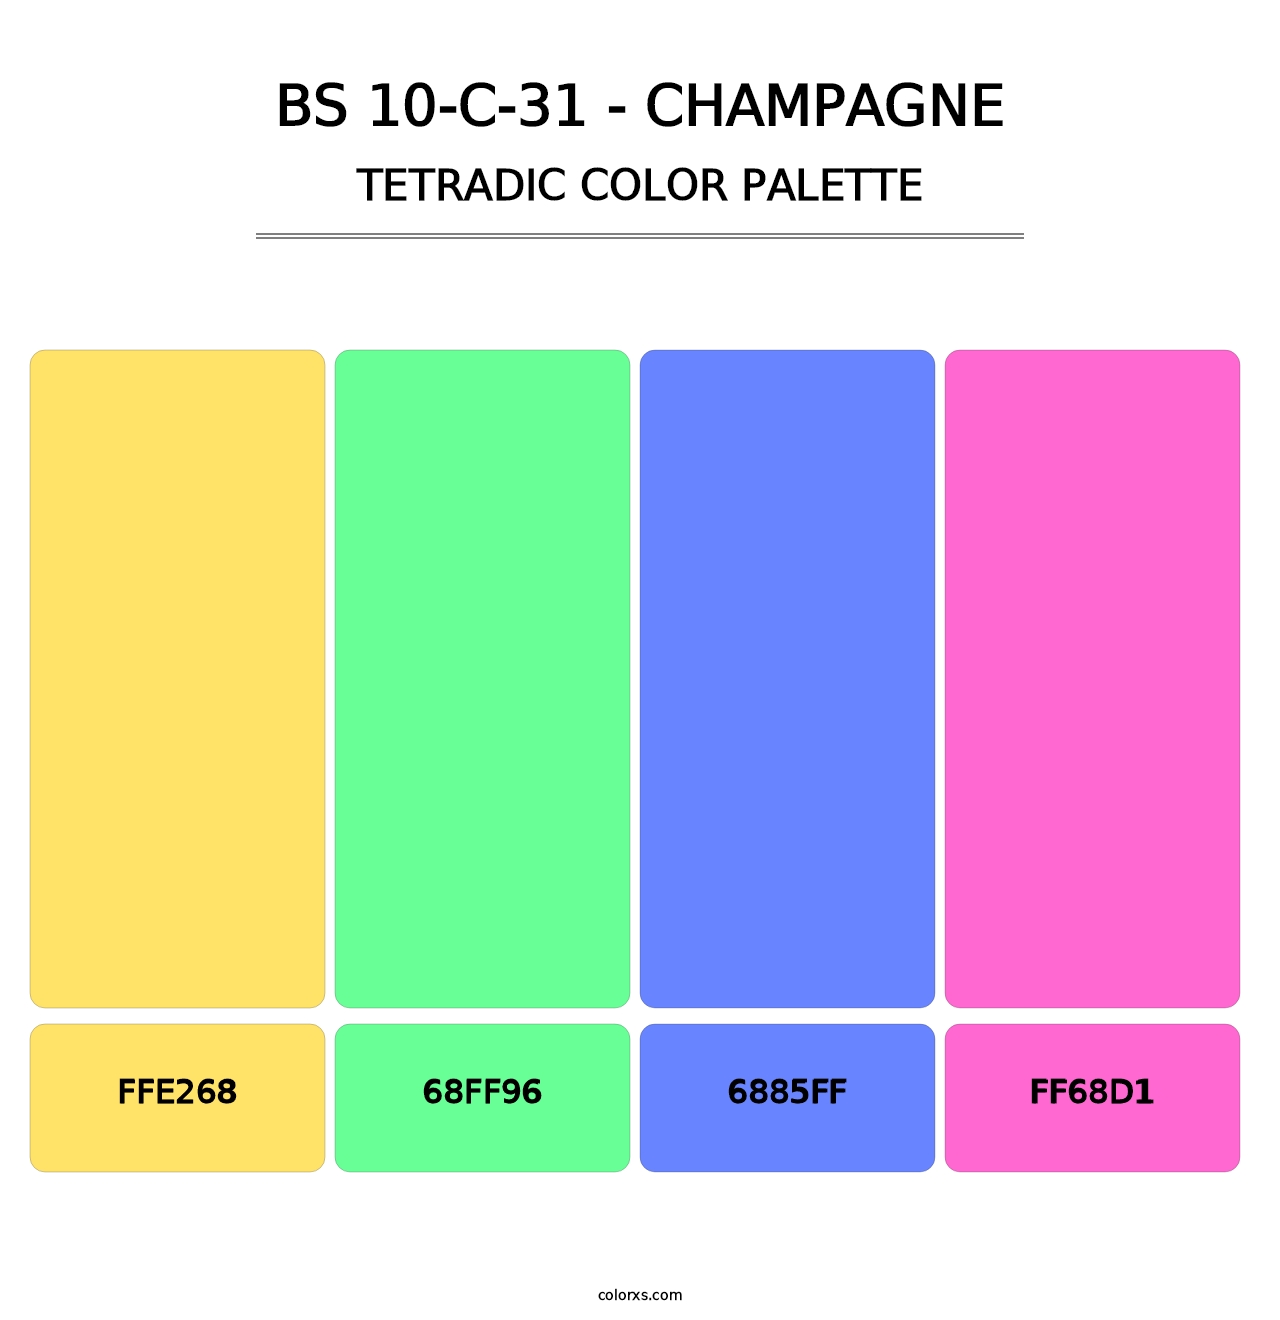 BS 10-C-31 - Champagne - Tetradic Color Palette